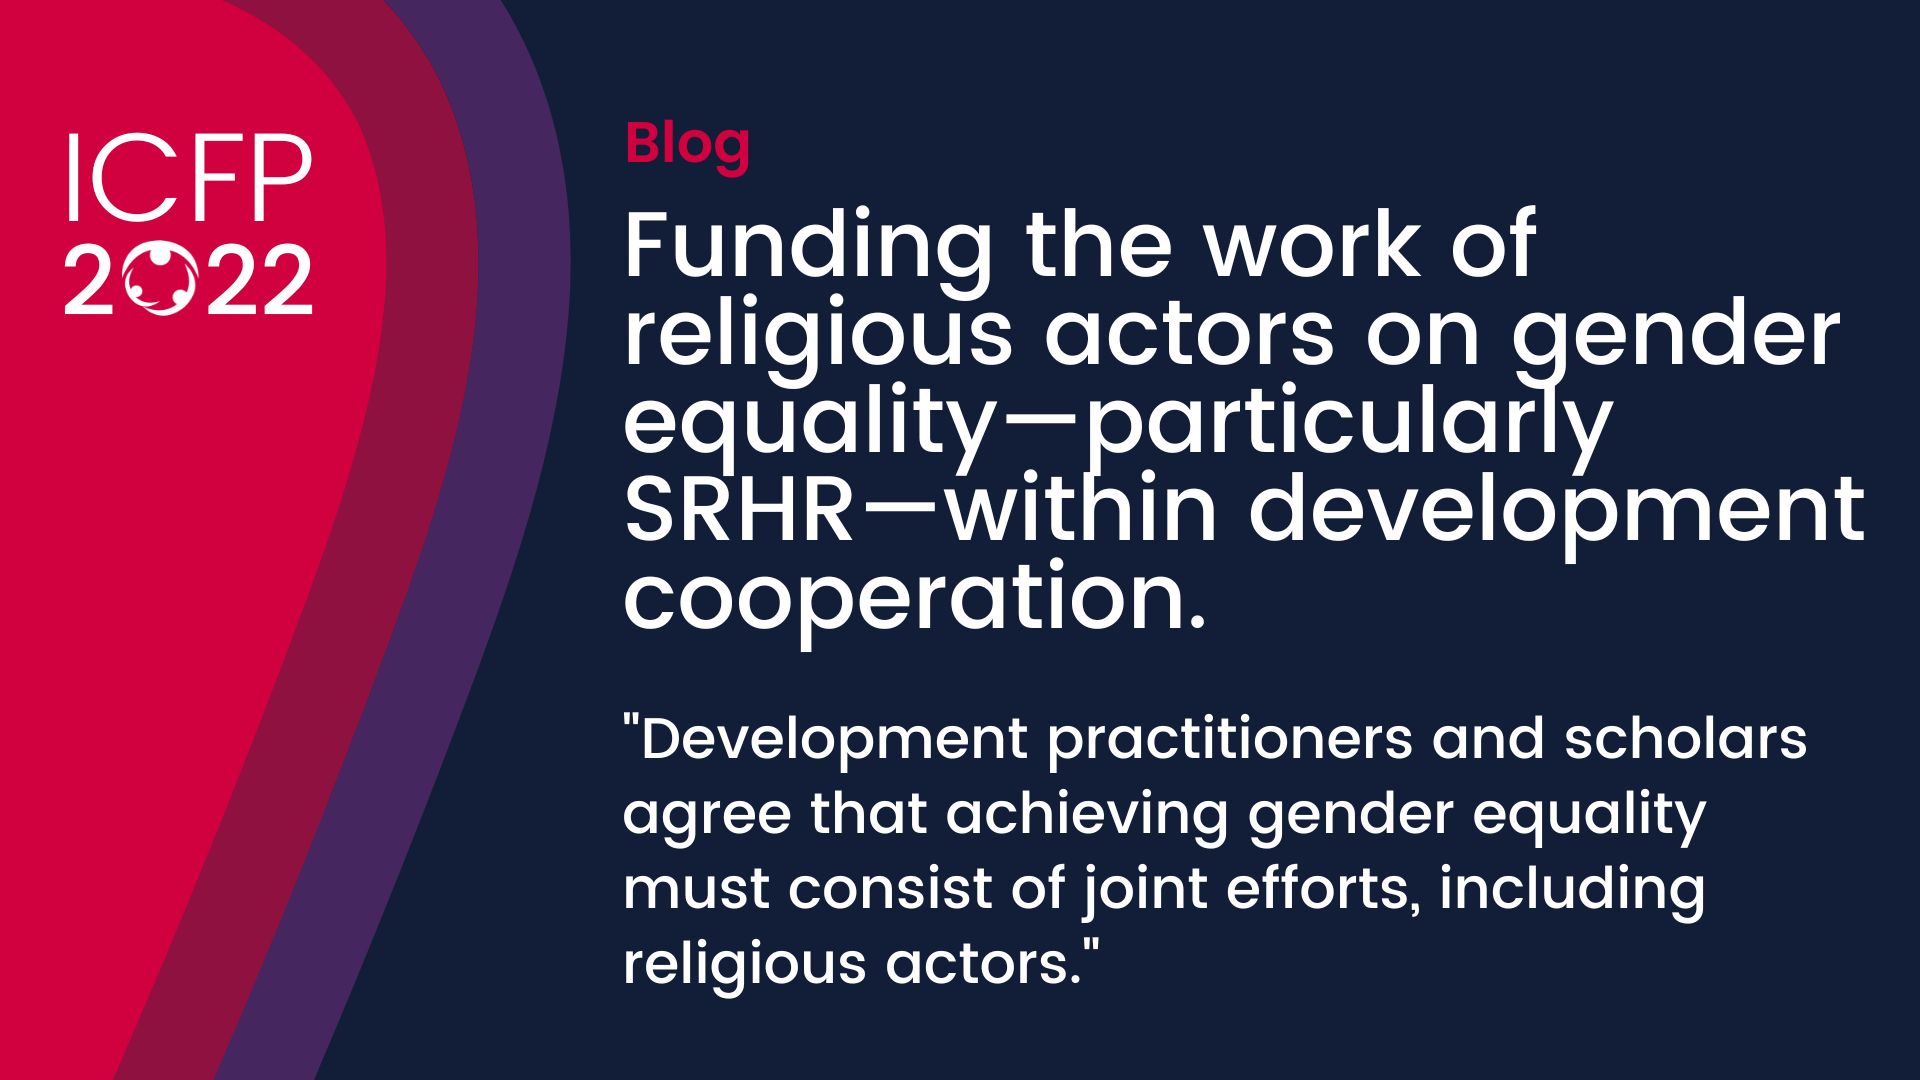 Funding the work of religious actors on gender equality—particularly SRHR—within development cooperation